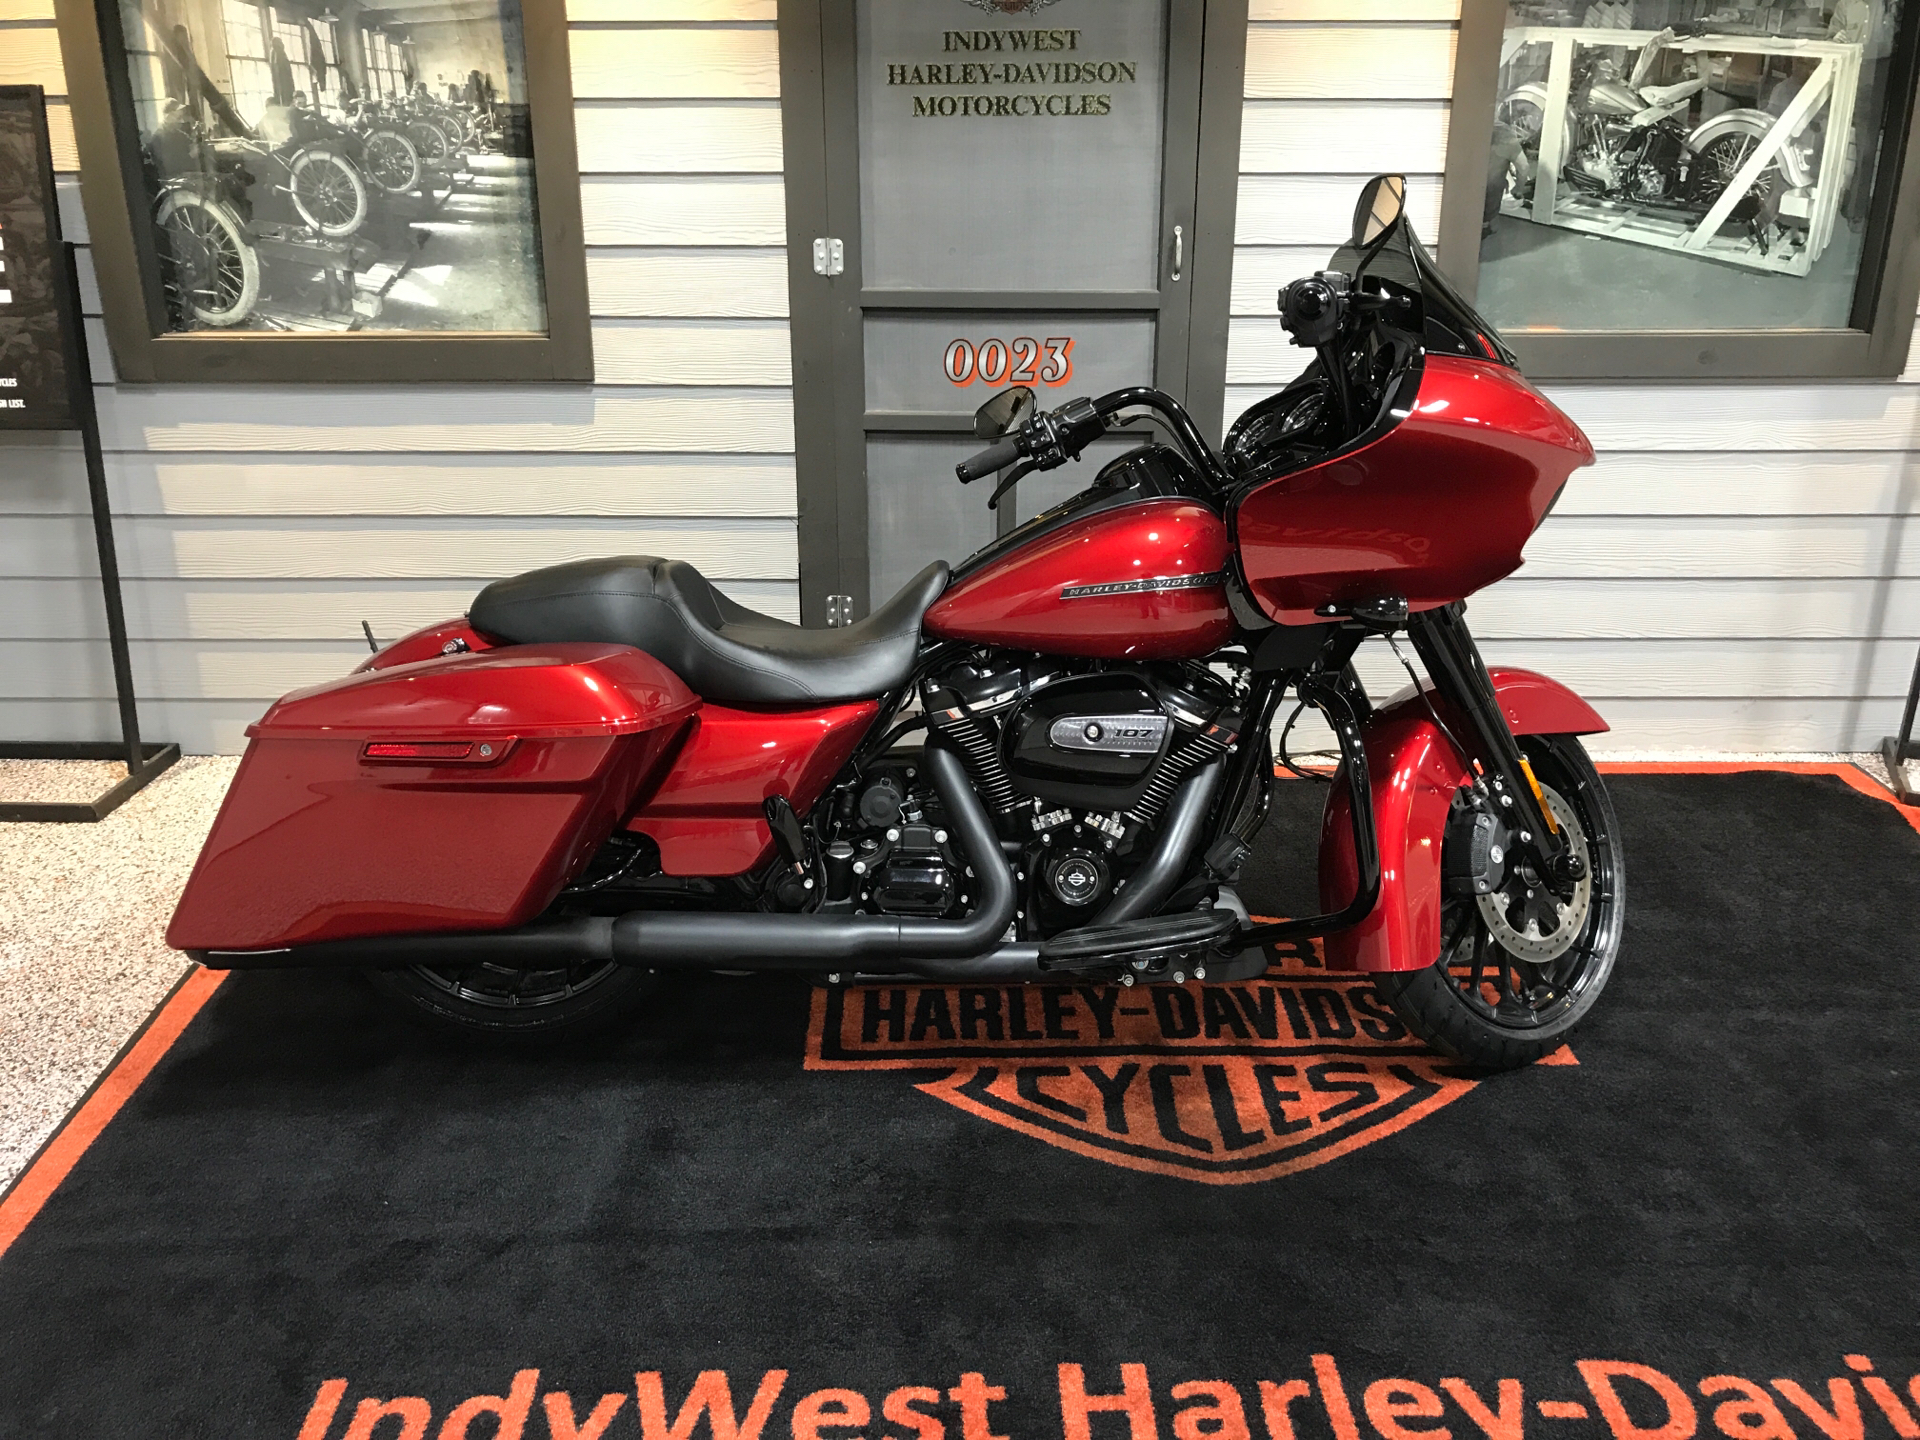 Used 2018 Harley Davidson Road Glide Special Wicked Red Motorcycles In Plainfield In 678744